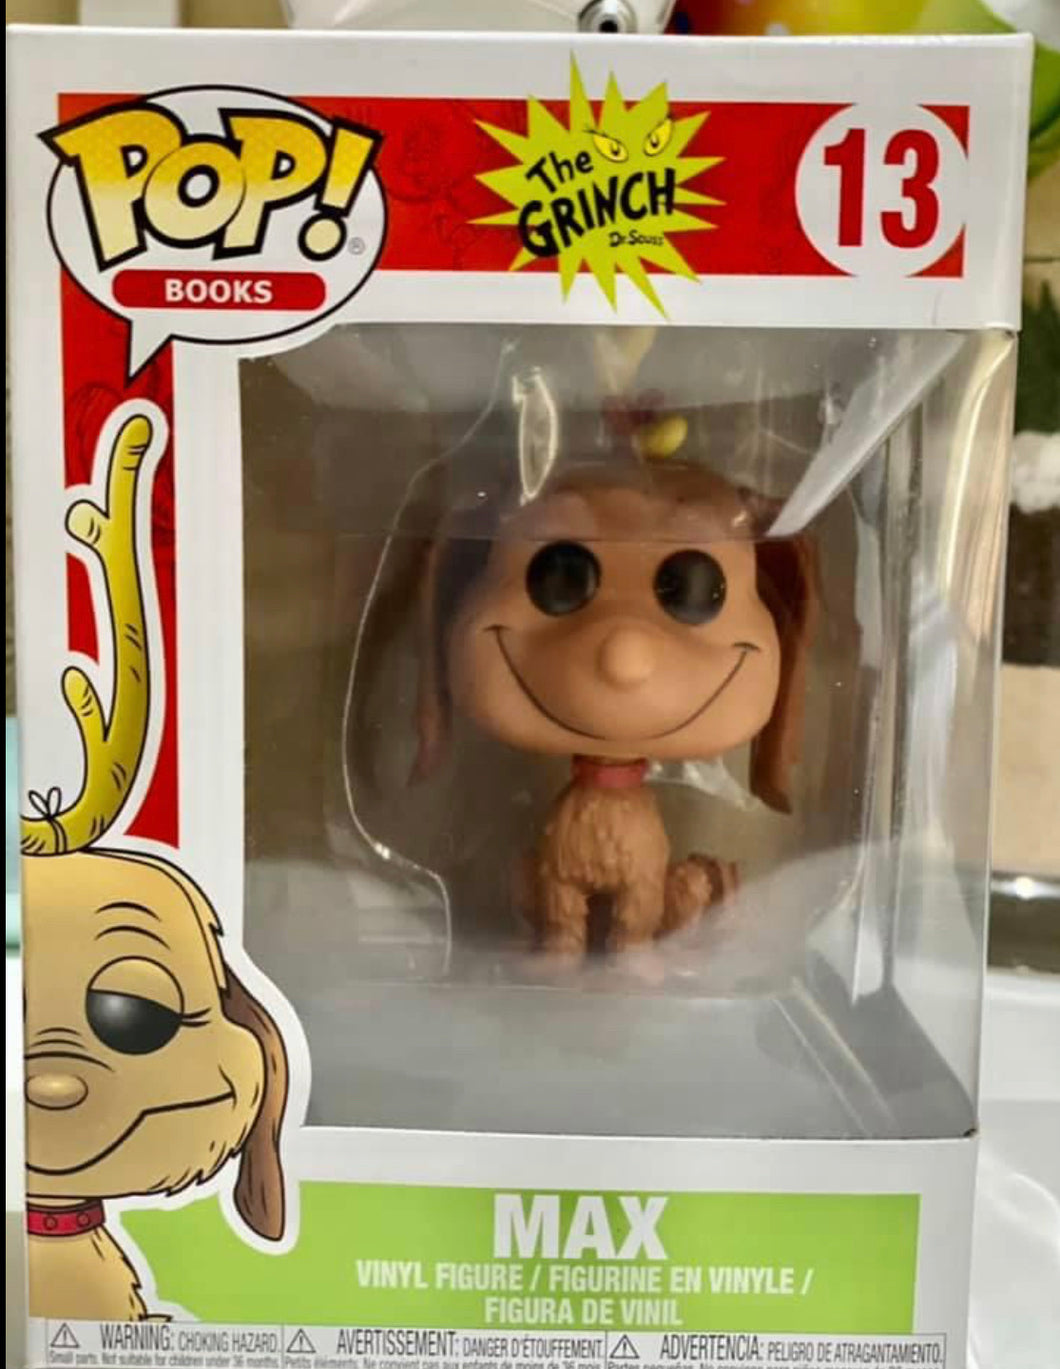 Vaulted The Grinch Max (Box Damage) Auction (Reserved for Auction Winner)